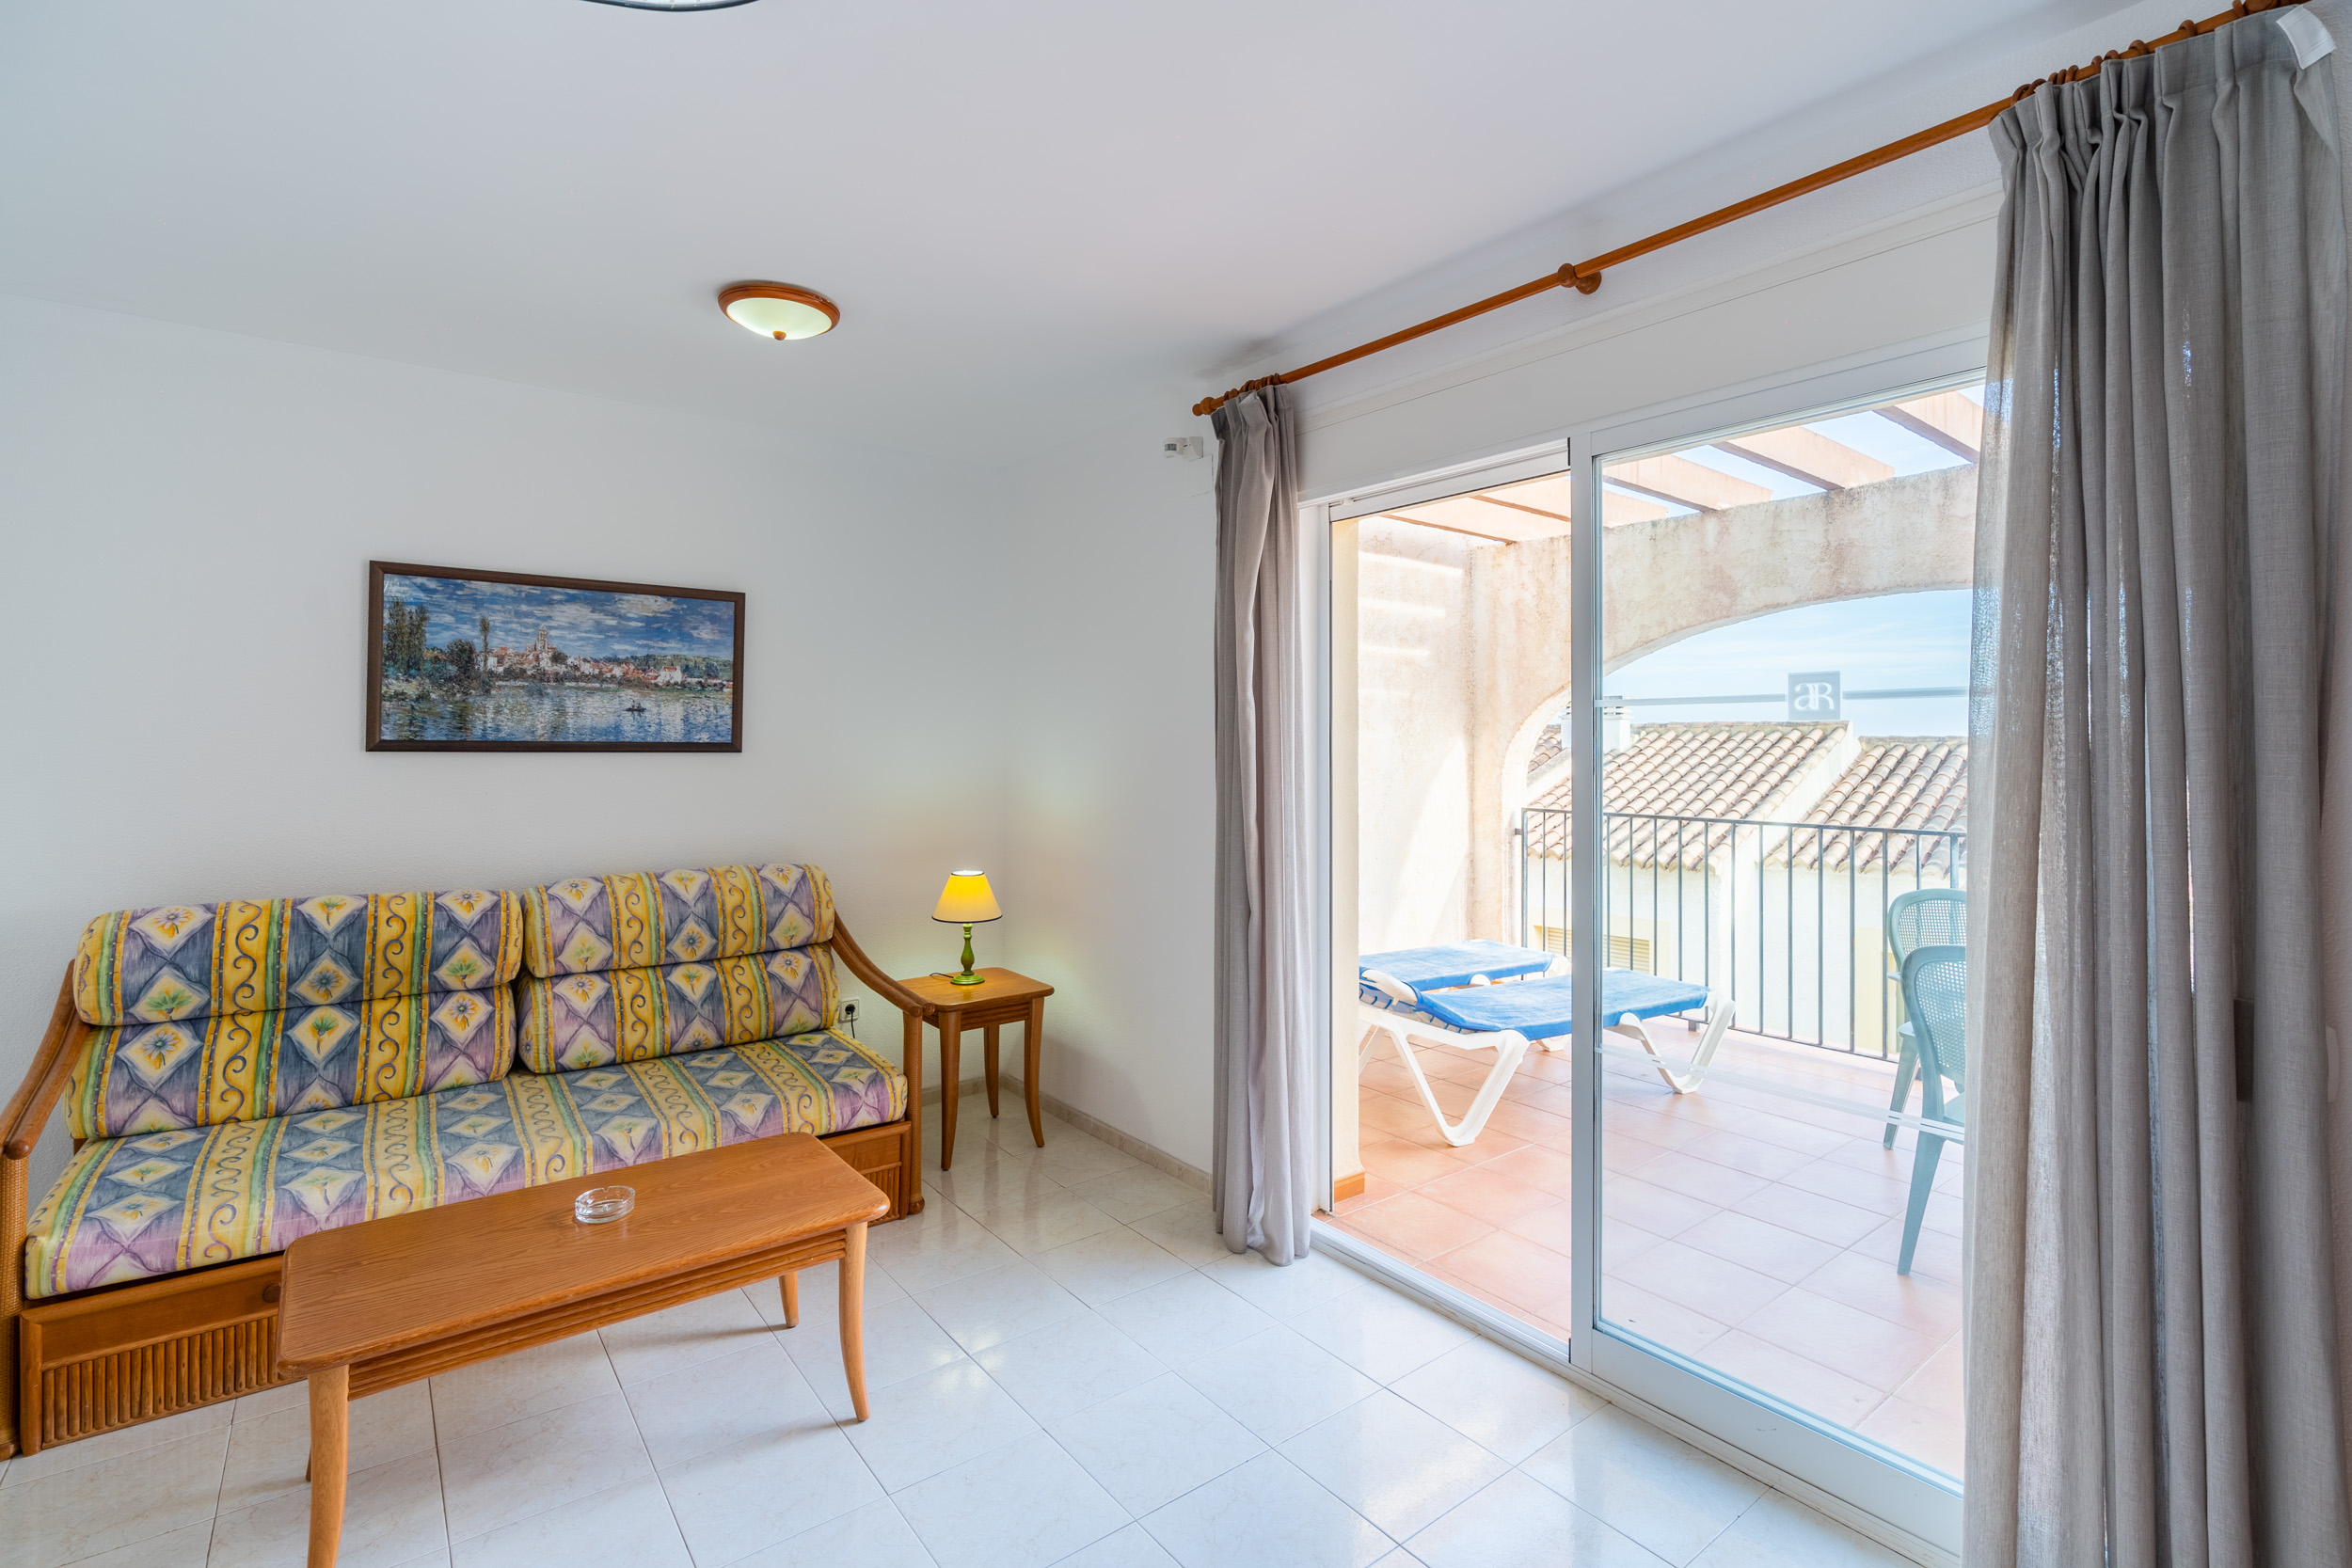 Bungalow for sale in Calpe in residential area with sea views and Peñon de Ifach